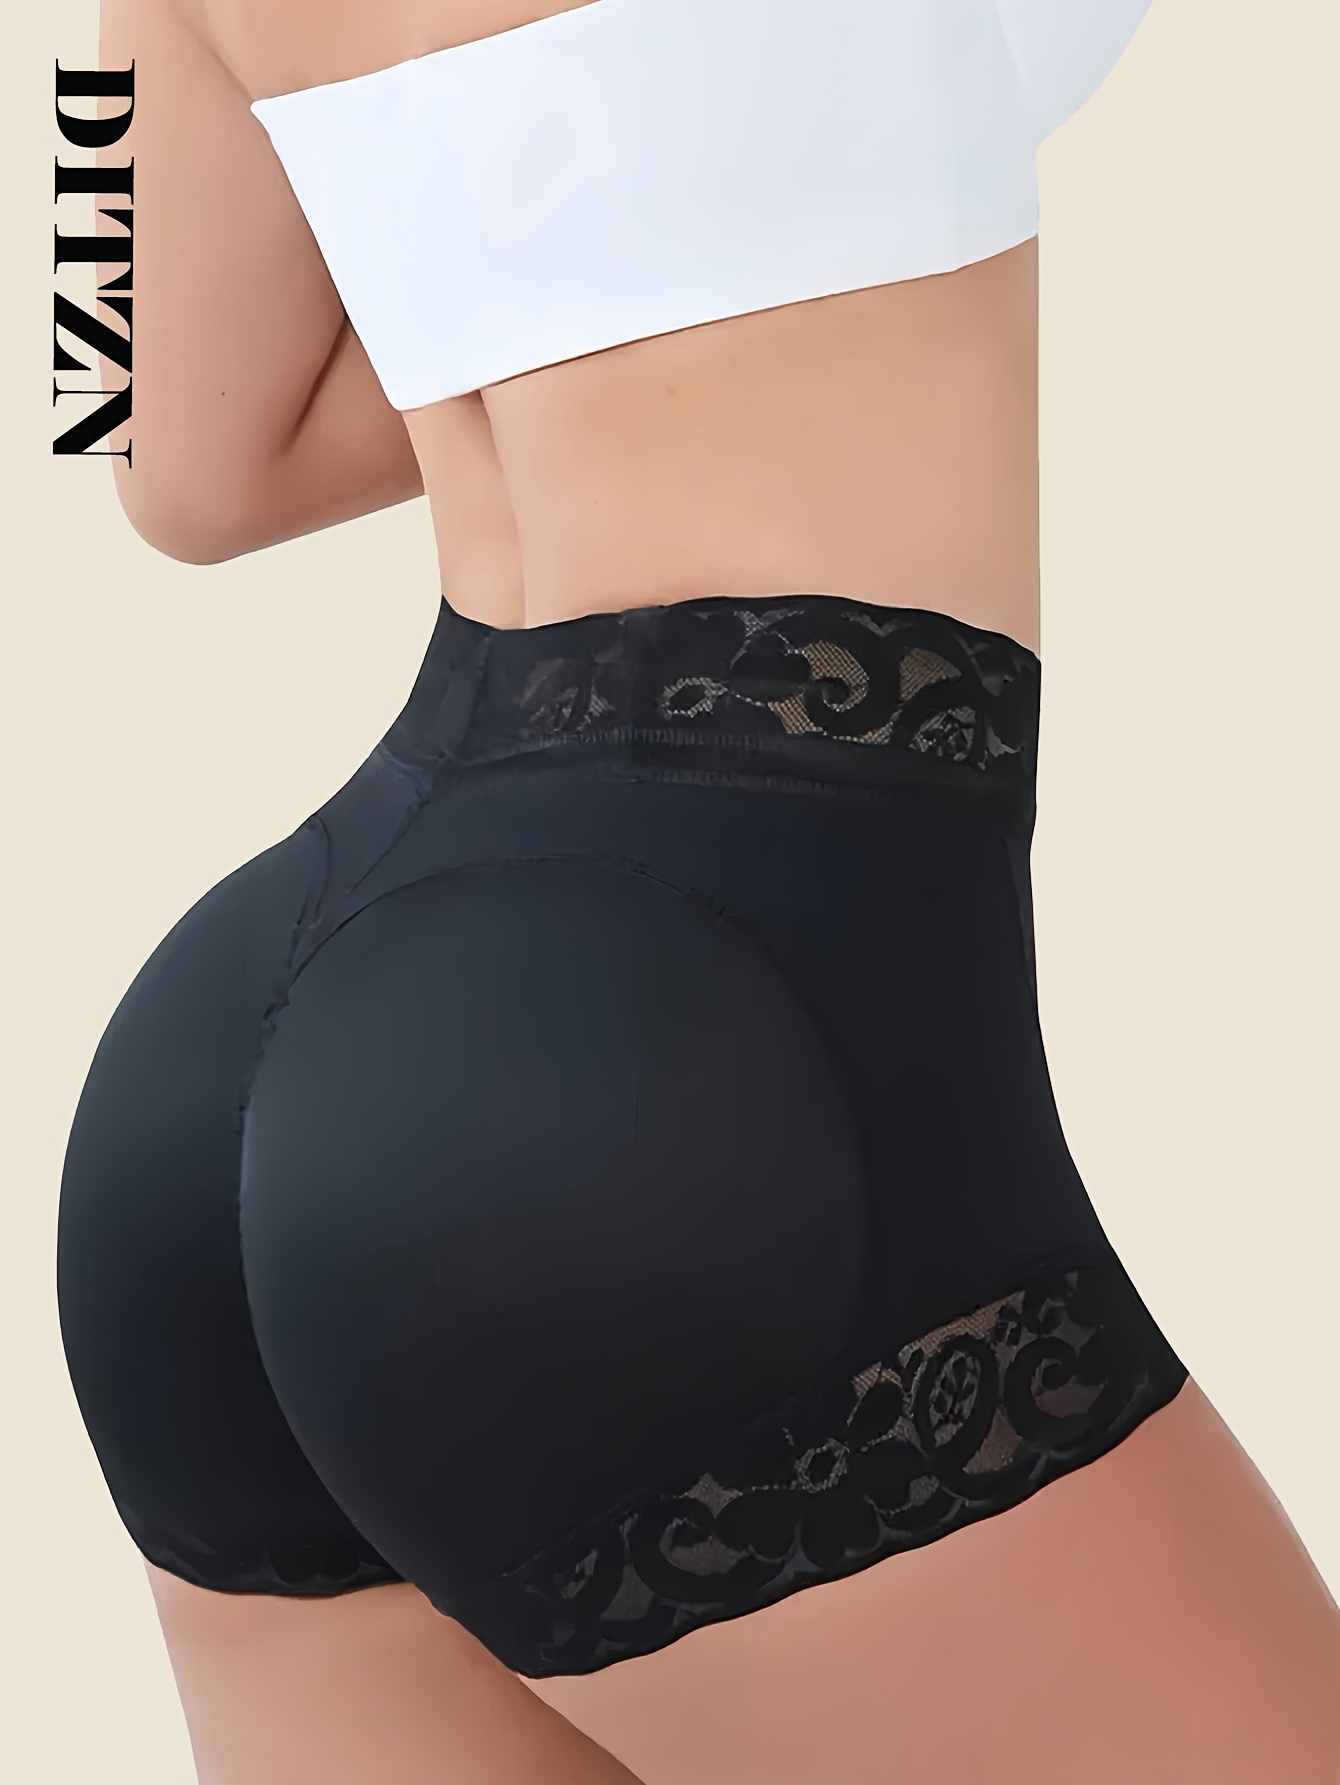 Comfortable & Breathable Womens Hip Lifting Hip Shaper Panty With Lace  Enhancer And Padded Underwear Free DHL Shipping From Buymall, $8.07